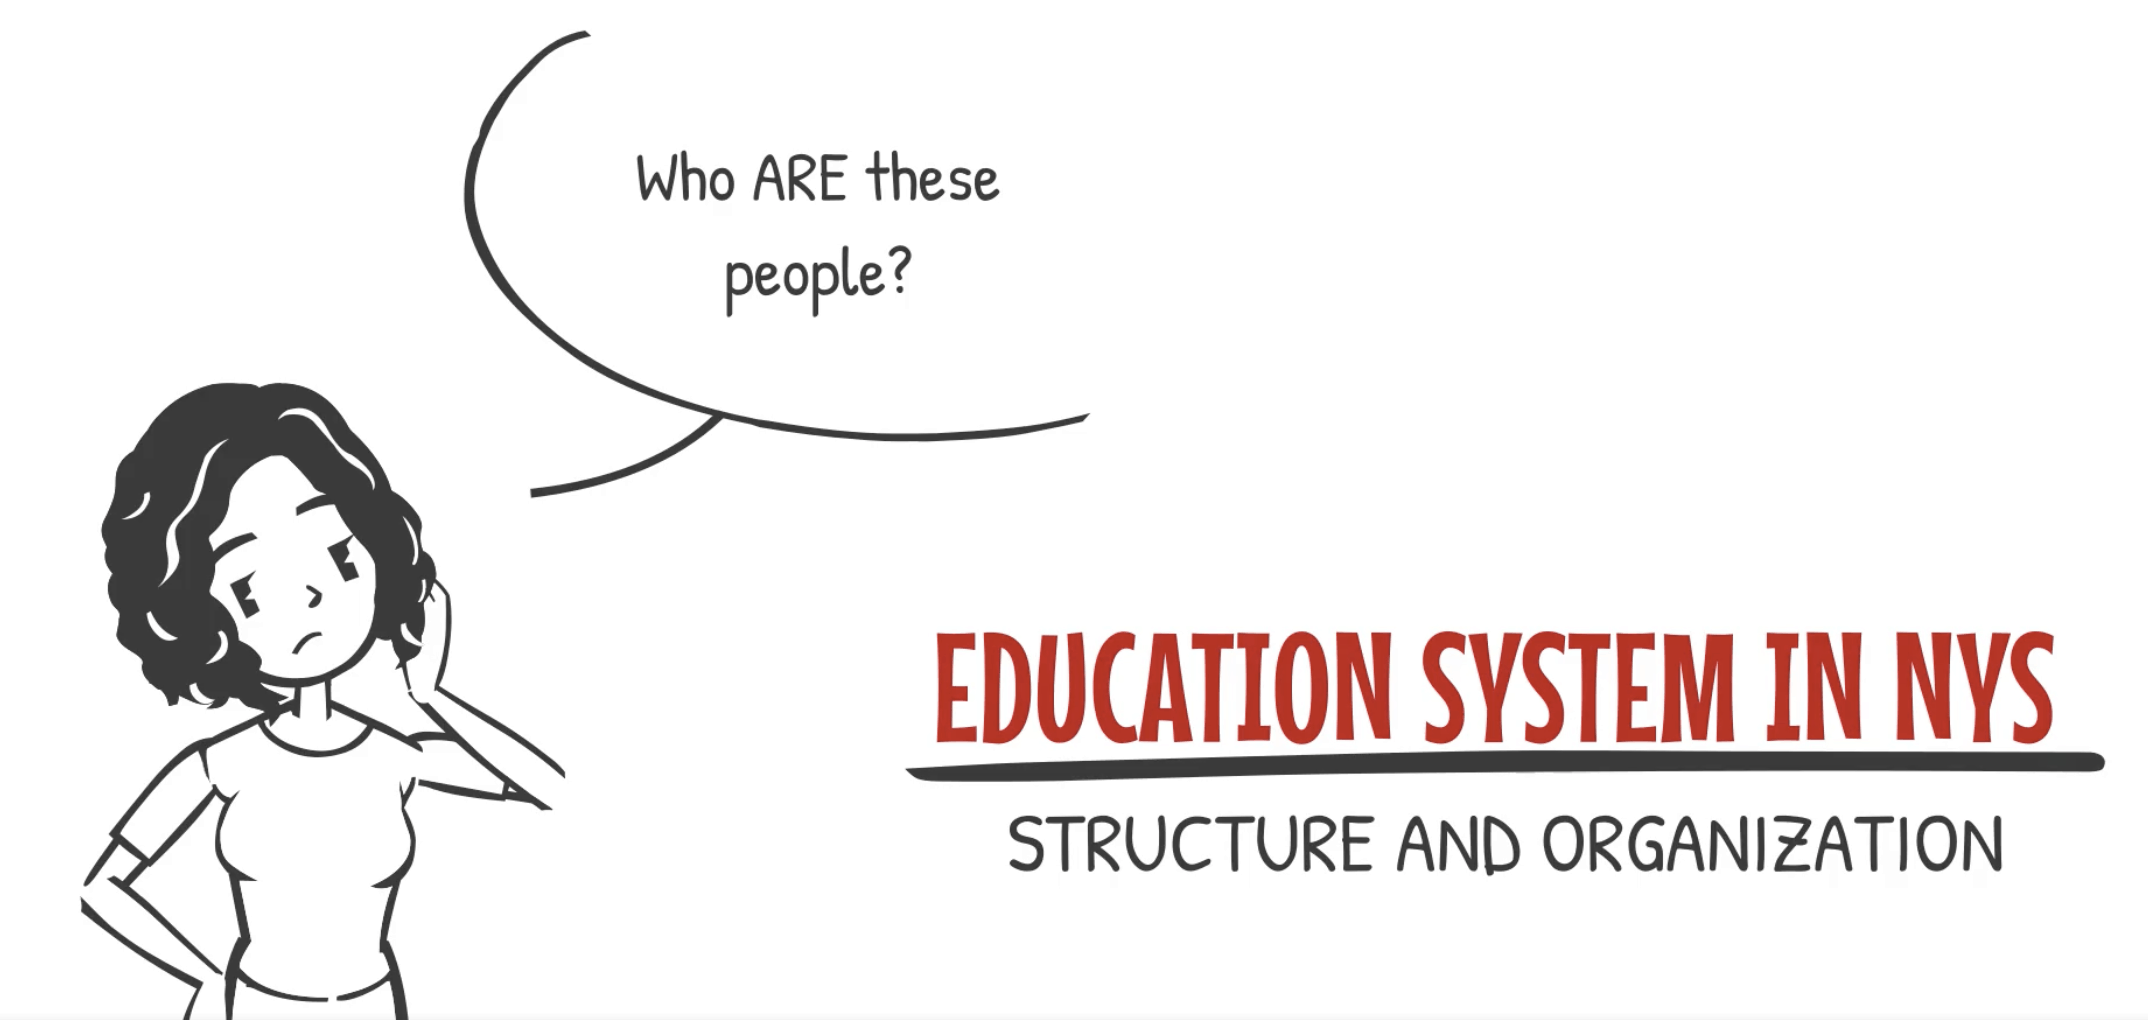 whiteboard image of title page for education system in nys video